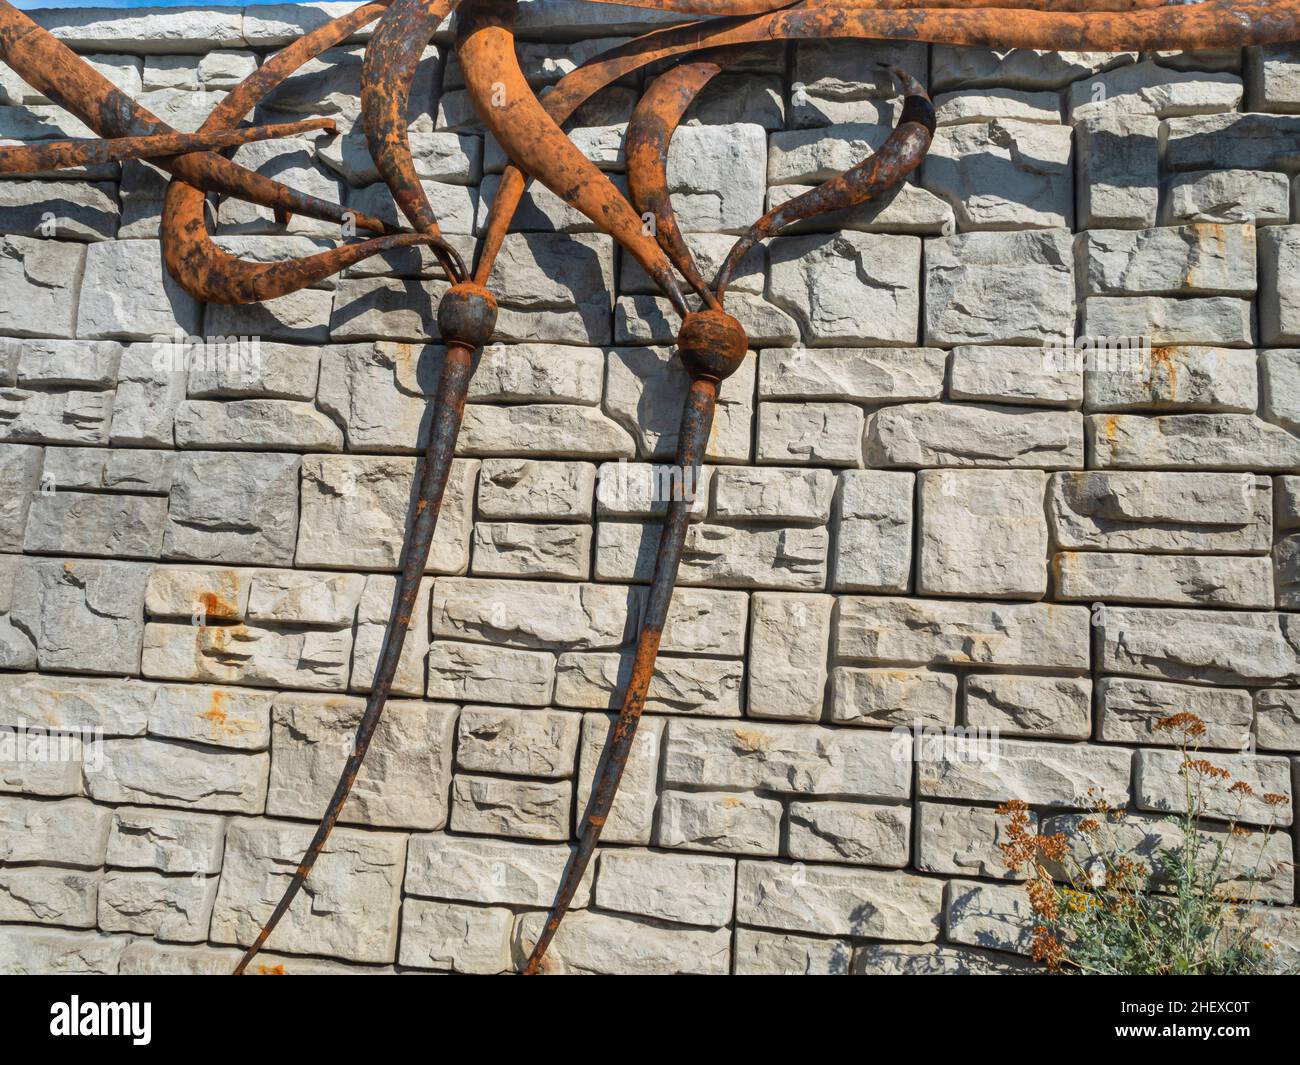 WA21093-00...WASHINGTON - Sculpture of kelp on a wall at the ferry dock at Orcas Village on Orcas Island. Stock Photo